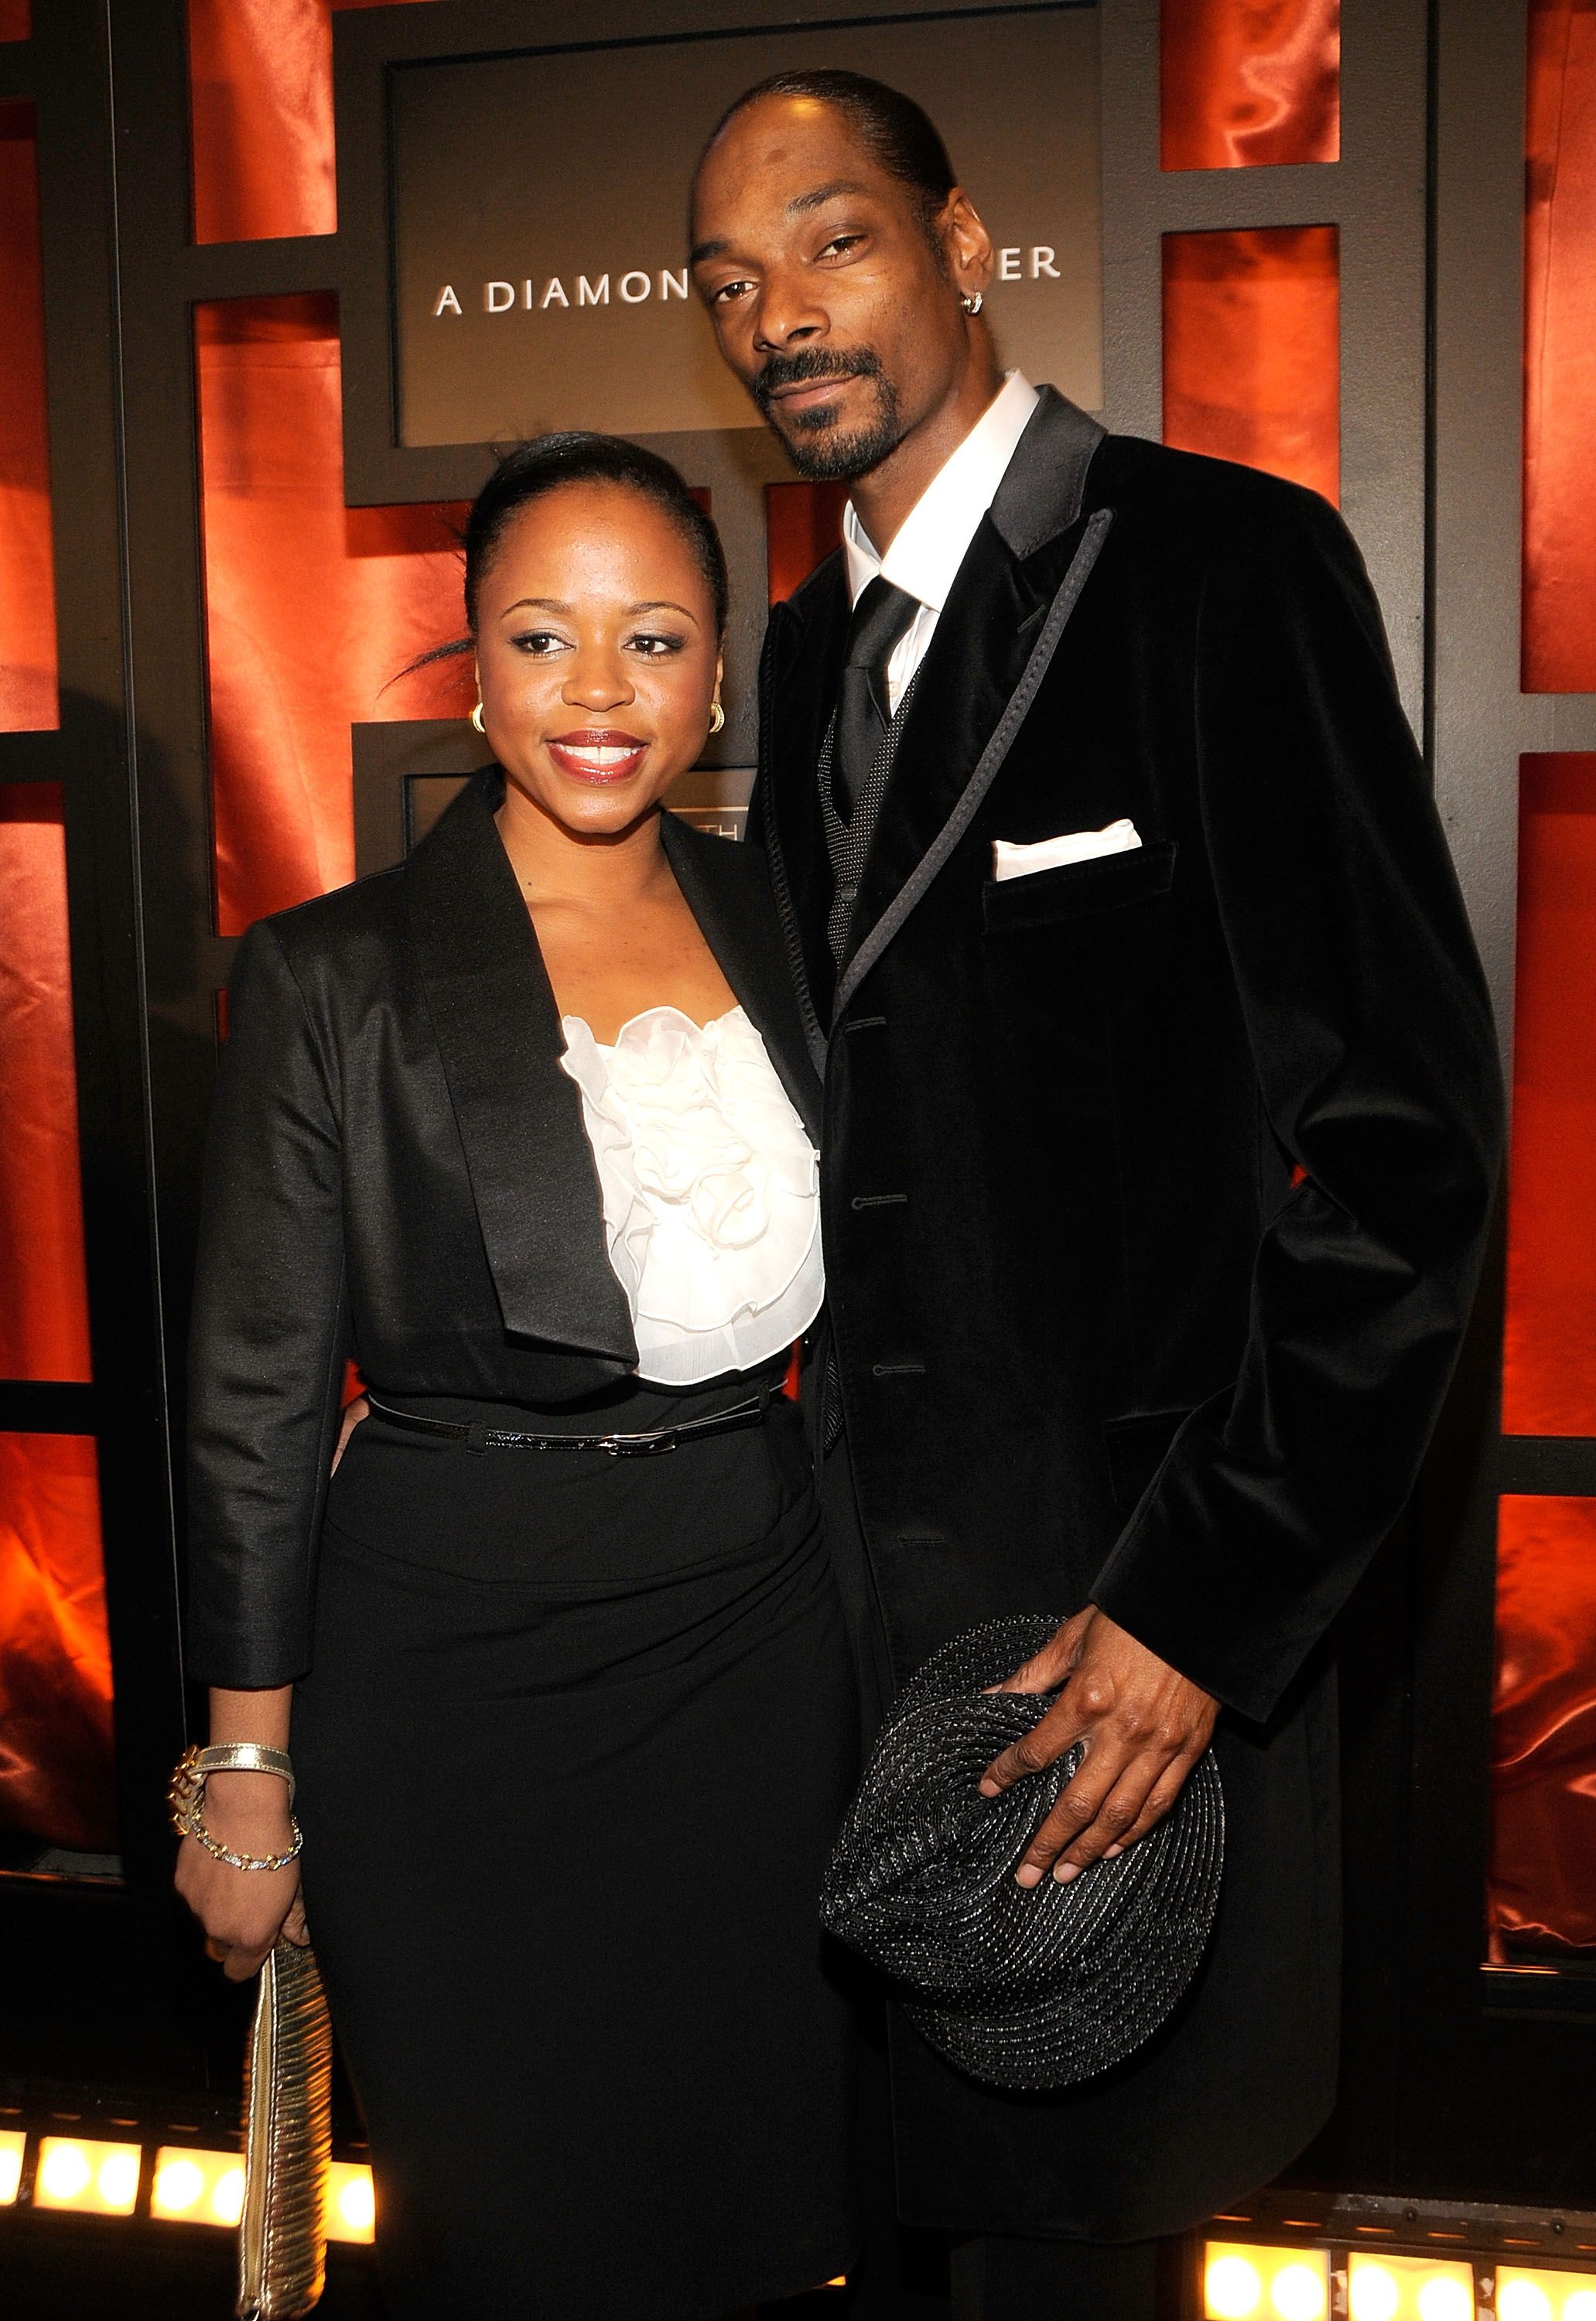 Shante Taylor and Snoop Dogg during the 13th Annual Critics' Choice Awards at the Santa Monica Civic Auditorium on January 7, 2008 in Santa Monica, California. | Source: Getty Images